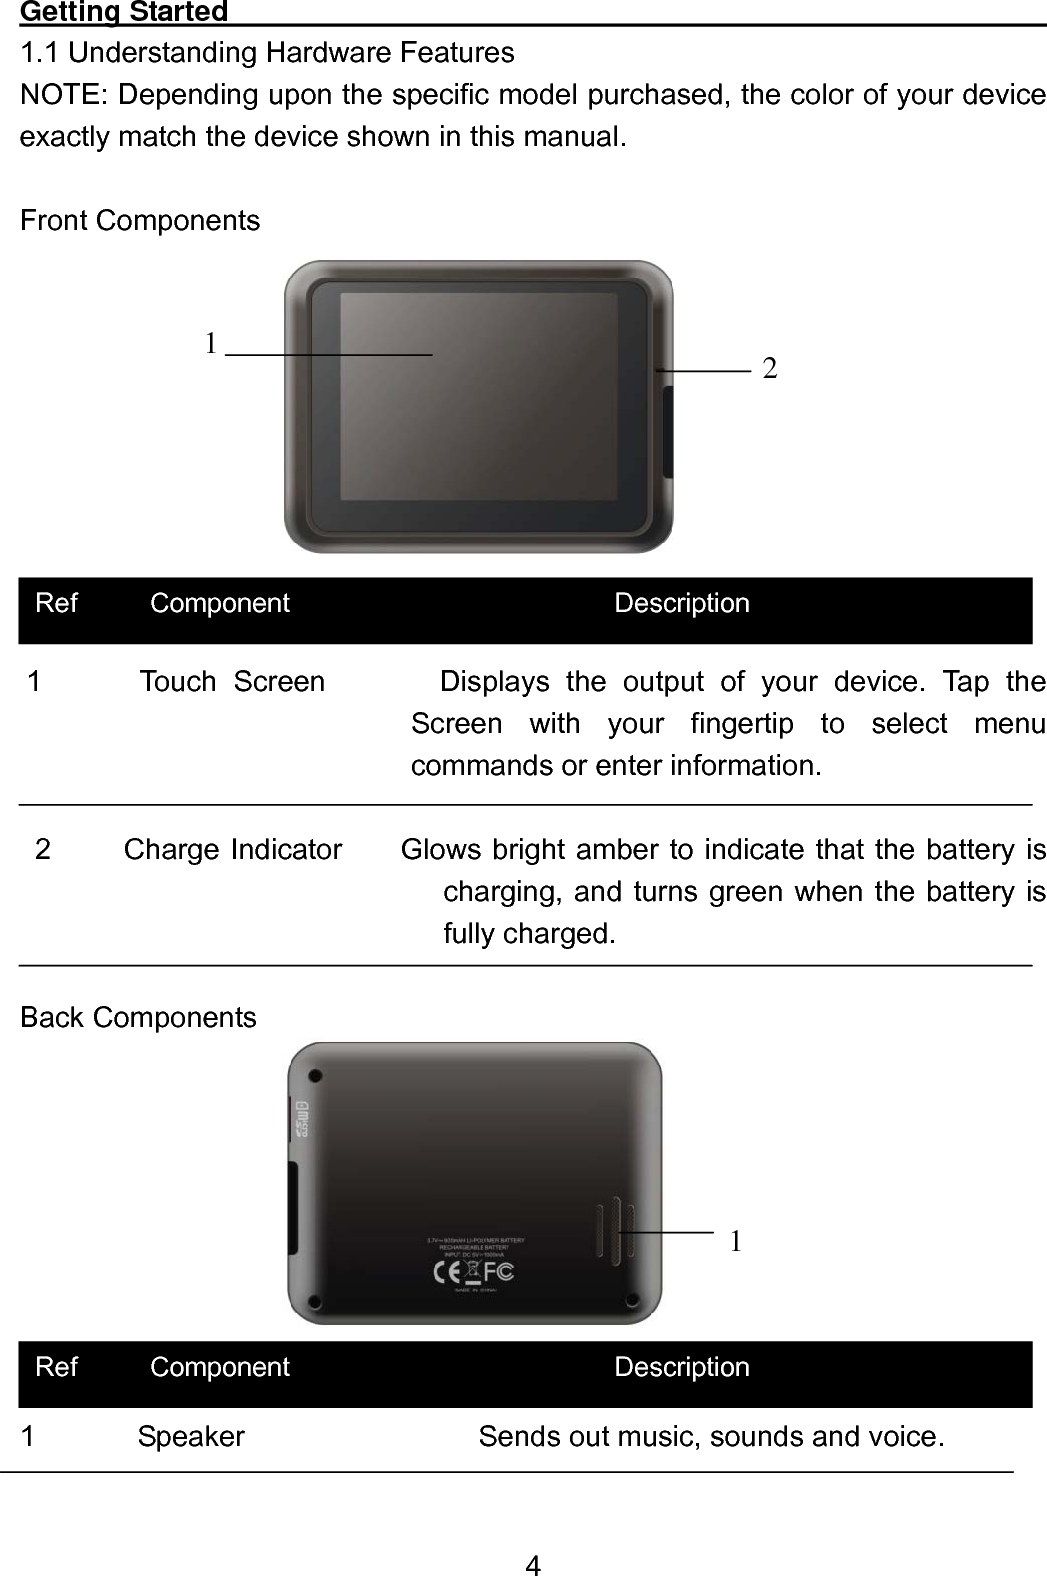  4Getting Started                                                                1.1 Understanding Hardware Features NOTE: Depending upon the specific model purchased, the color of your device exactly match the device shown in this manual.  Front Components           1      Touch Screen       Displays the output of your device. Tap the Screen with your fingertip to select menu commands or enter information.  2     Charge Indicator    Glows bright amber to indicate that the battery is charging, and turns green when the battery is fully charged.  Back Components          1       Speaker                   Sends out music, sounds and voice.    Ref     Component                        Description                   Ref     Component                        Description                   1  2 1 